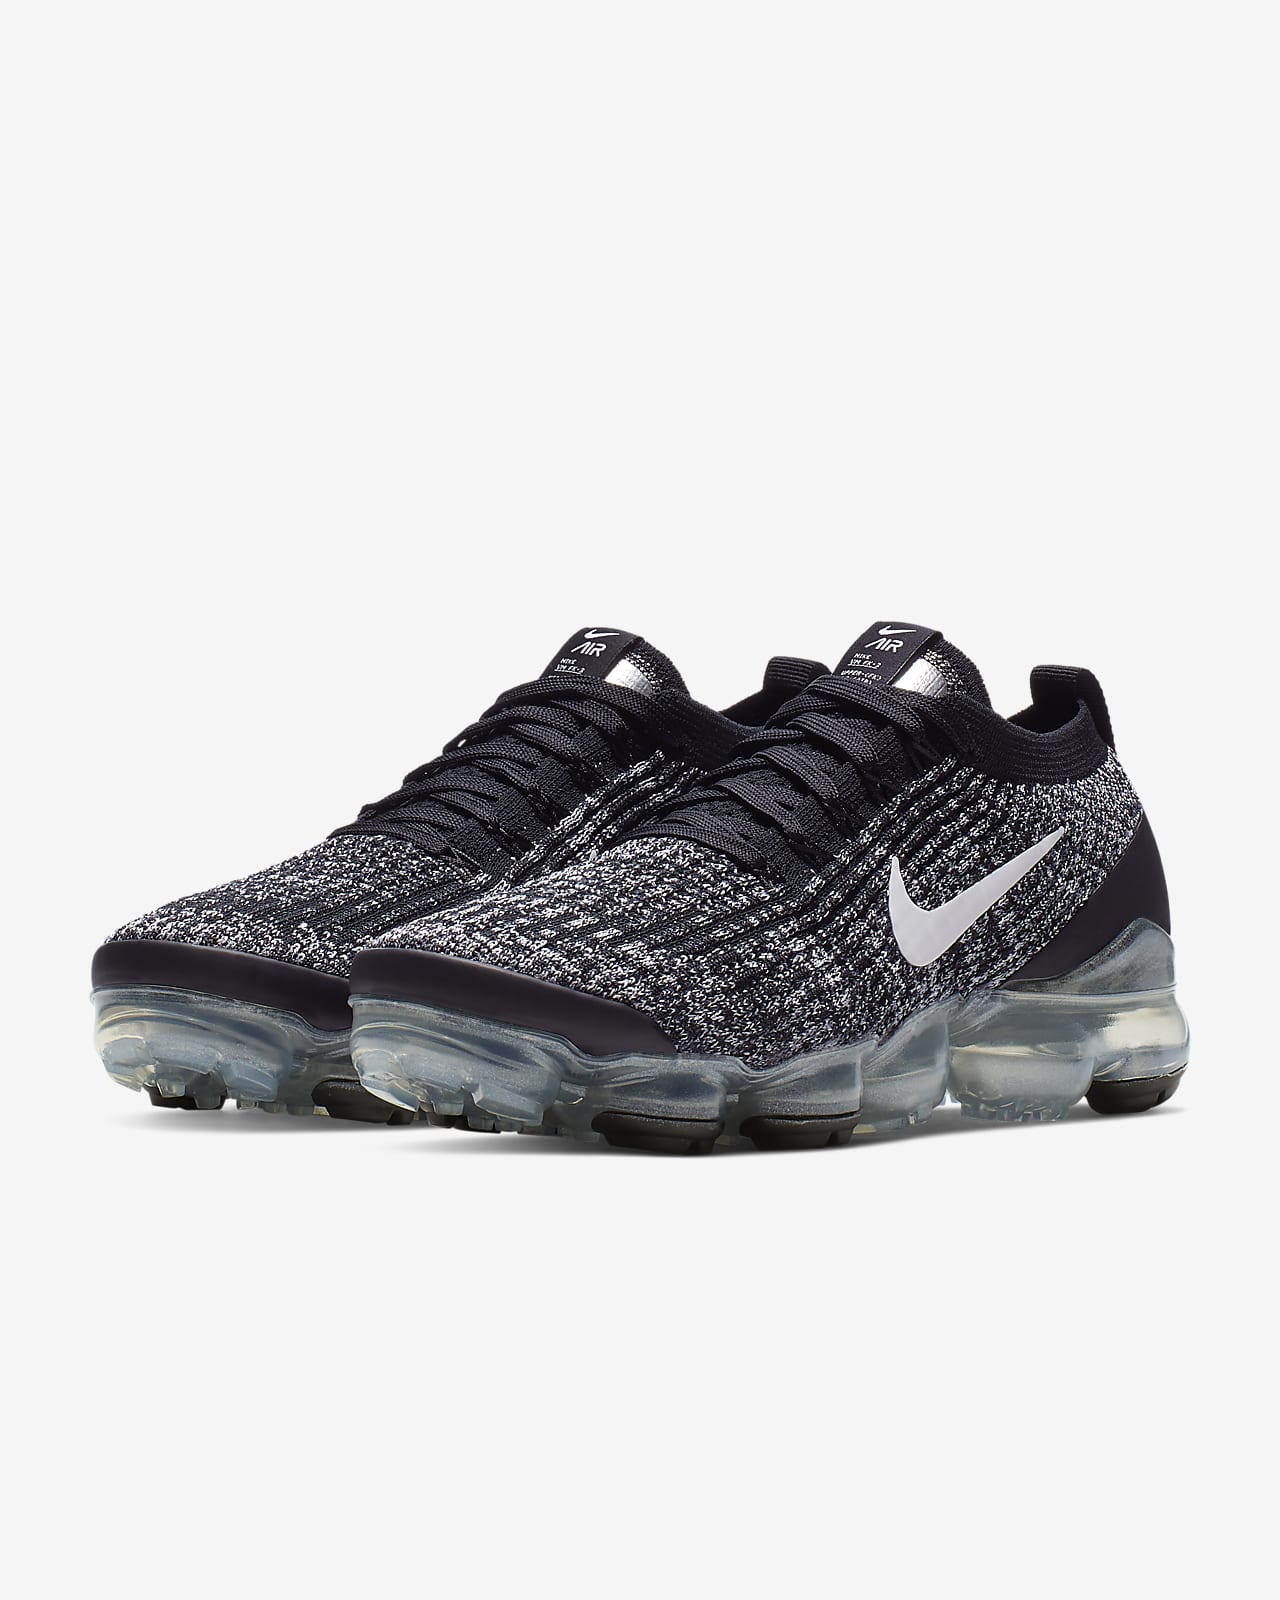 vapormax for working out